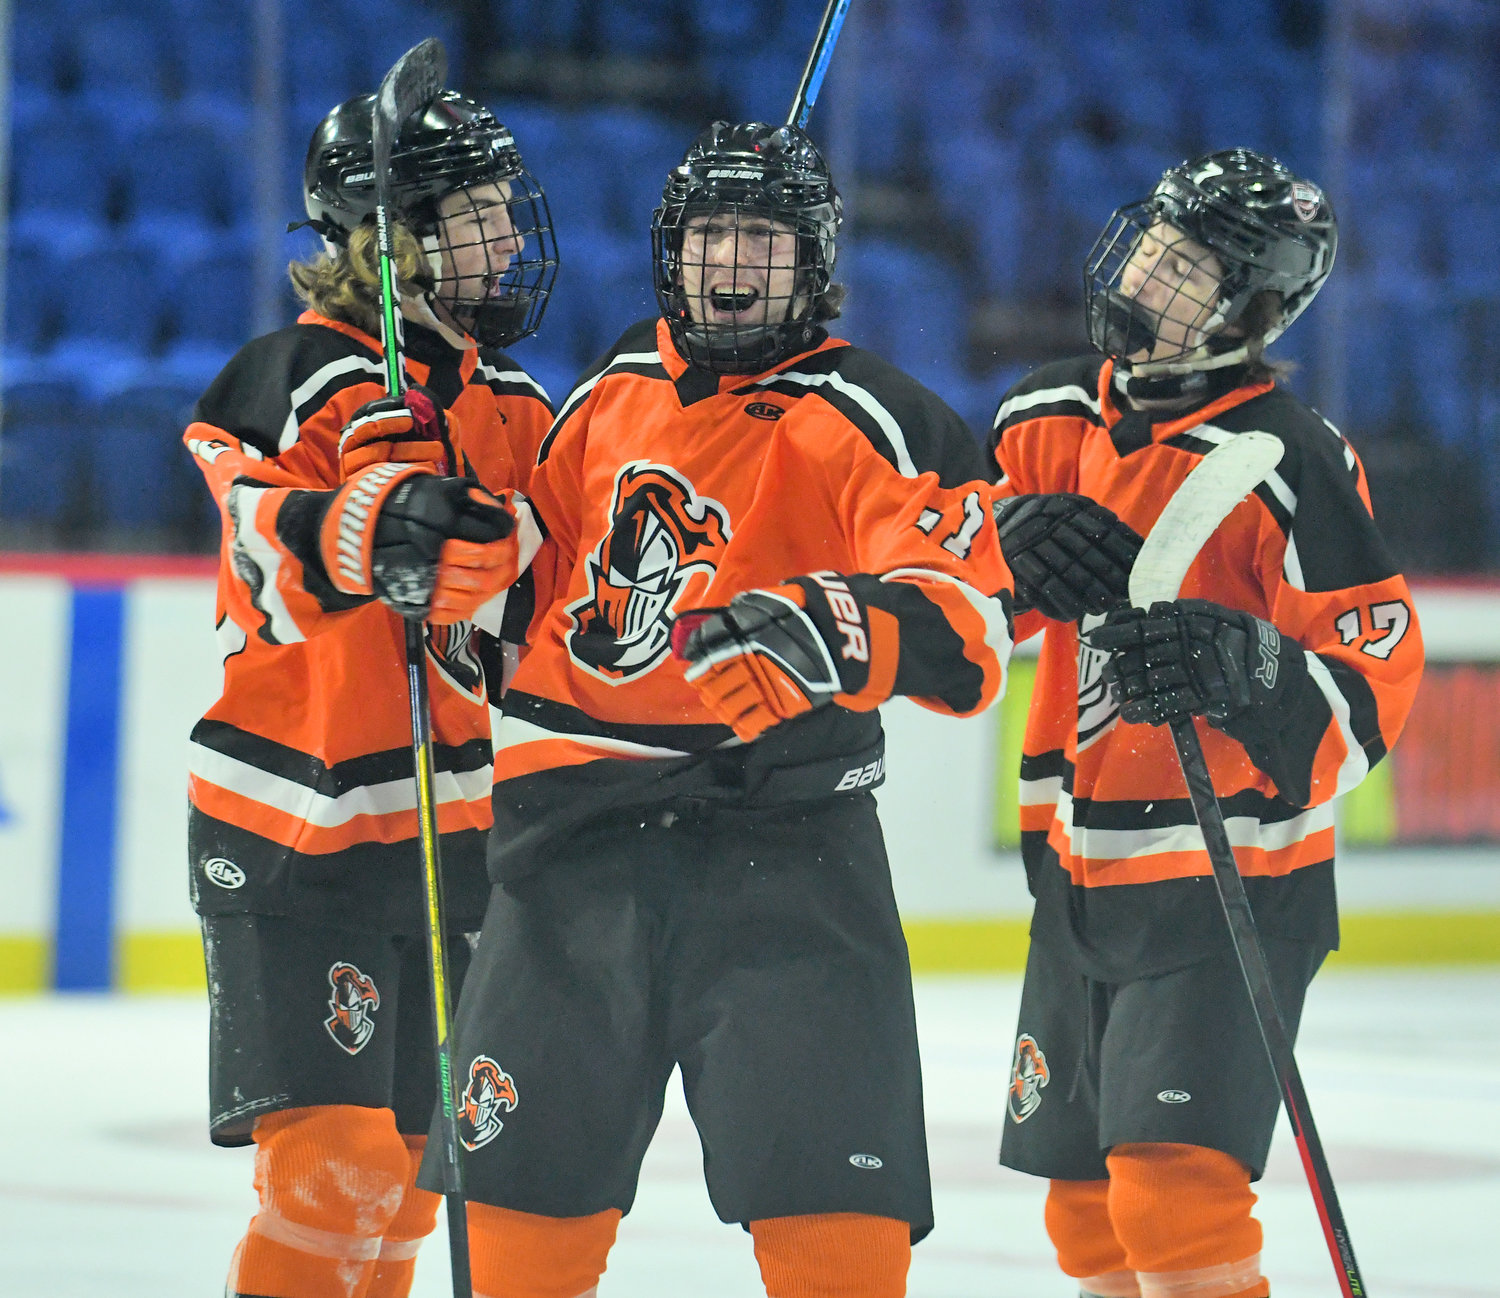 RFA’s Jacob Swavely (middle) celebrates his first period goal with teammates Logan Waterman, left, and Jimmy DeAngelo, right on Thursday night at the Adirondack Bank Center in Utica. RFA picked up a 5-1 win over Mohawk Valley.